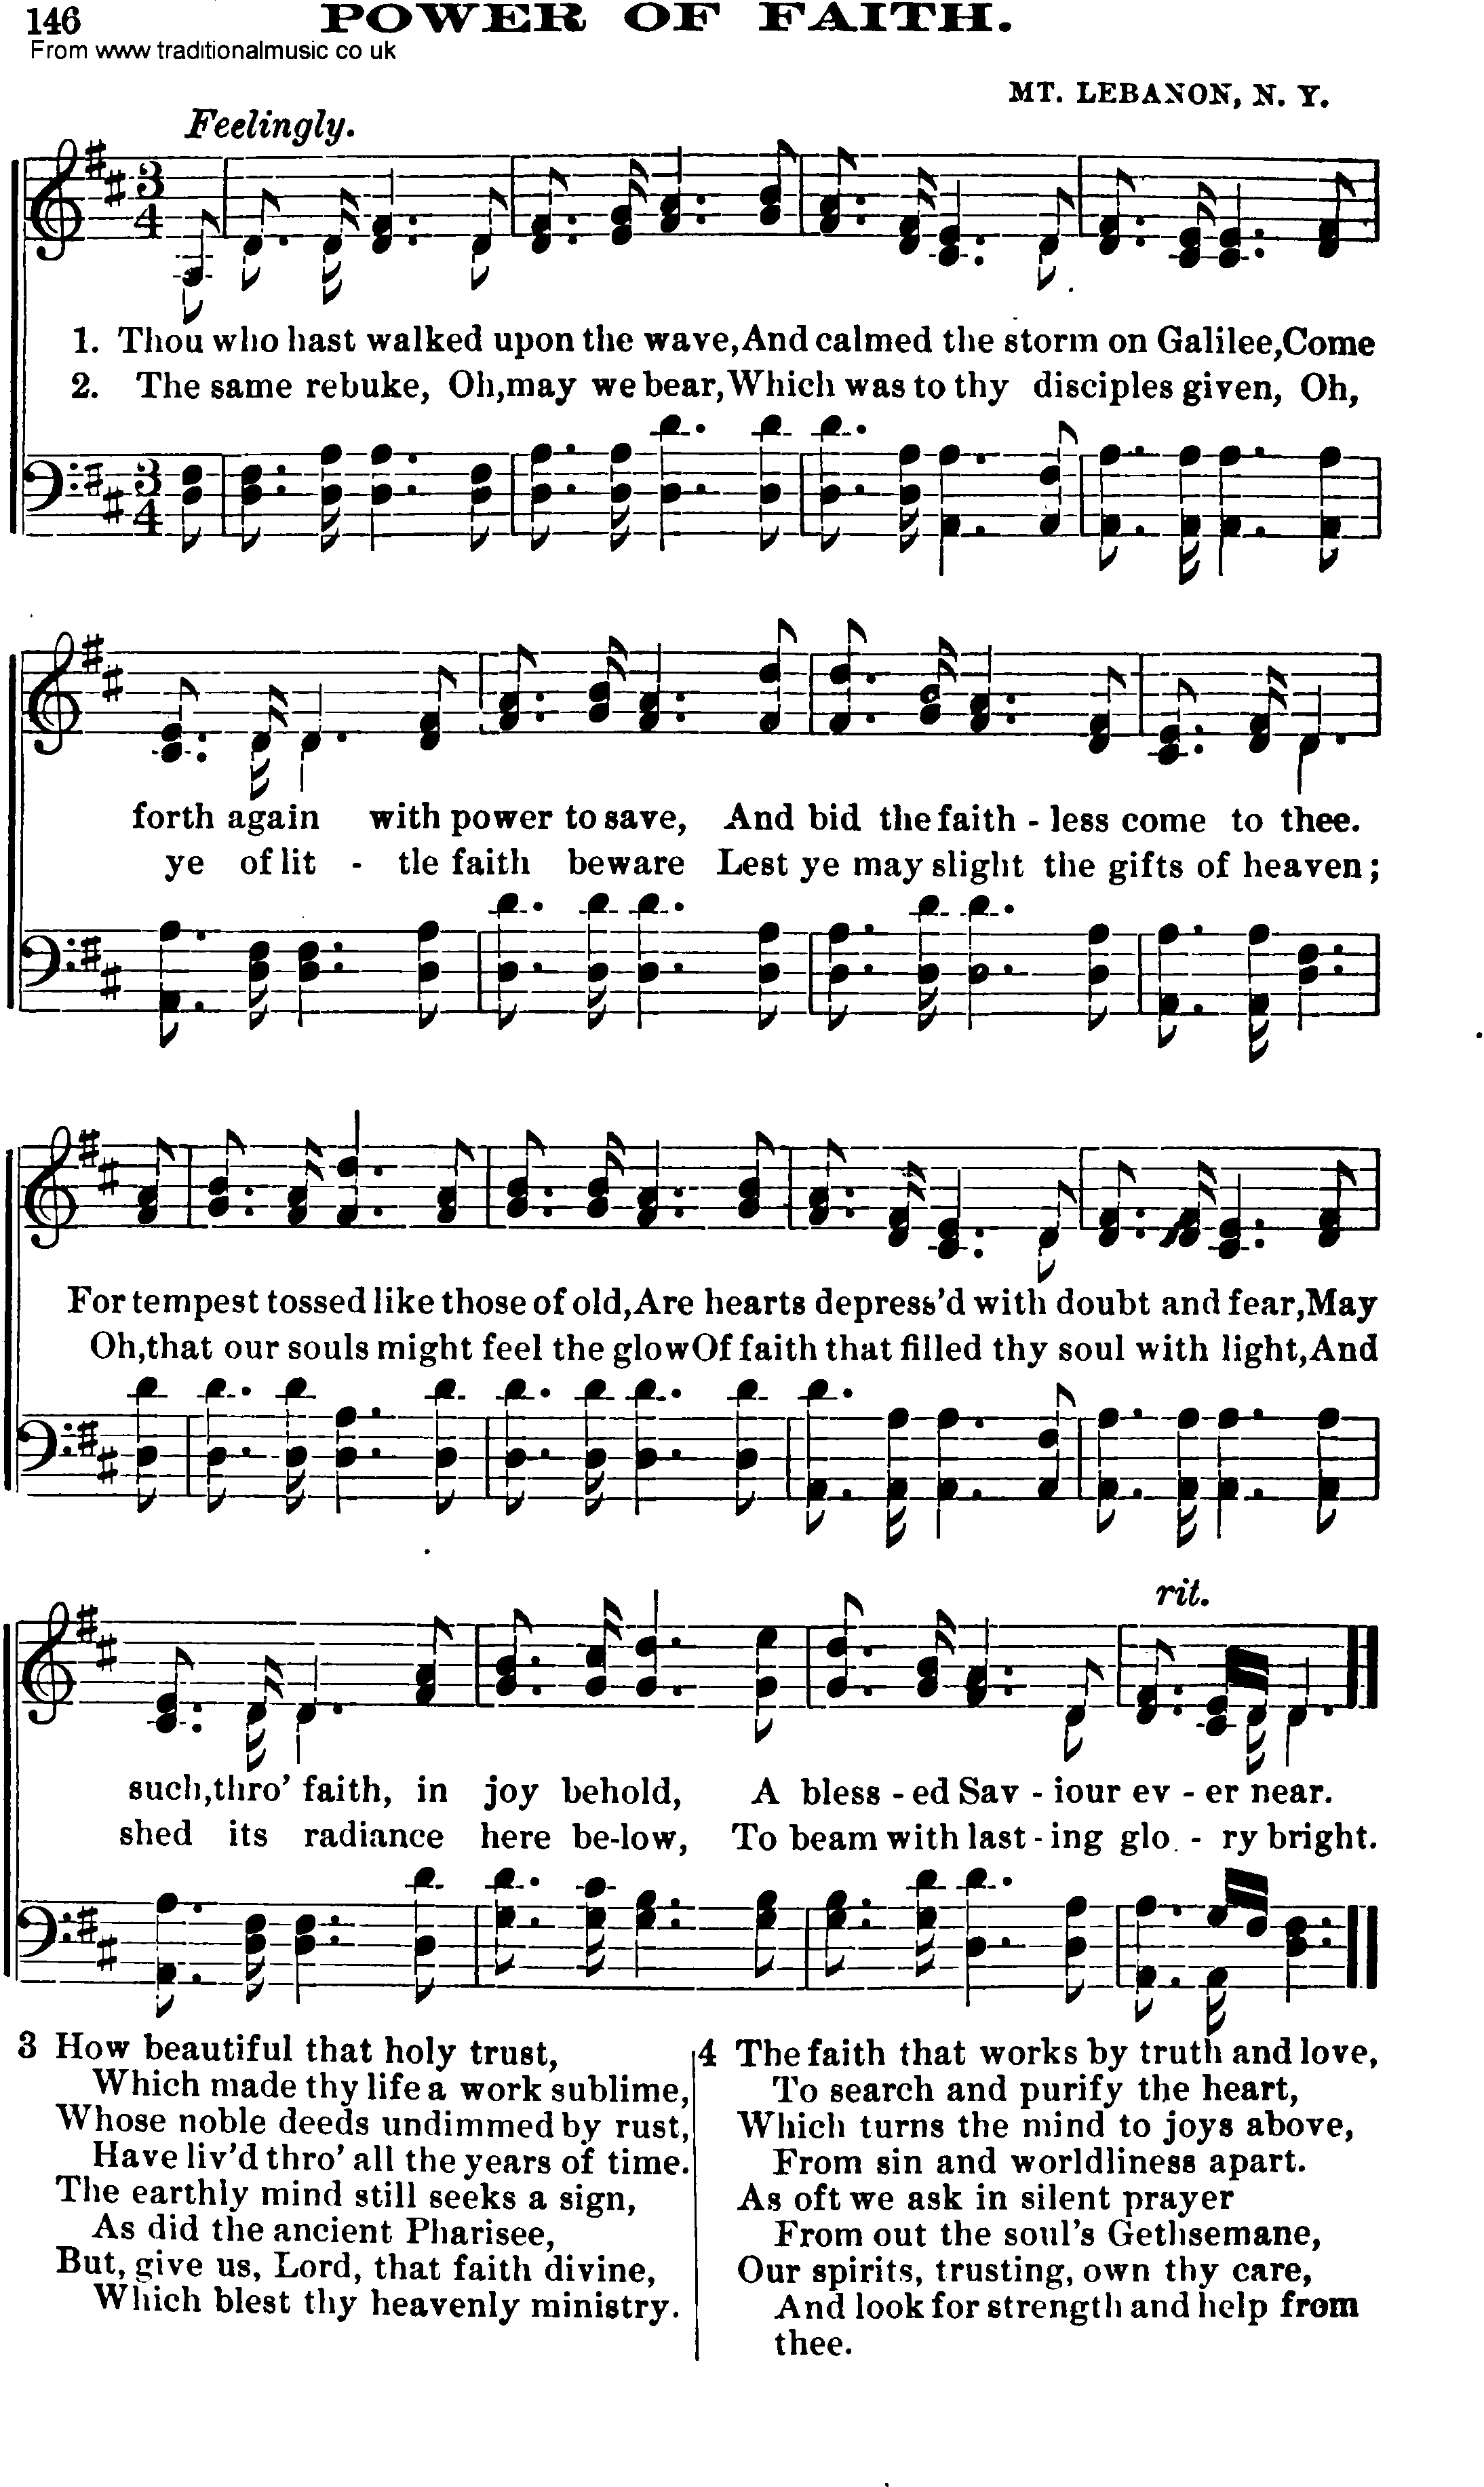 Shaker Music collection, Hymn: Power Of Faith, sheetmusic and PDF